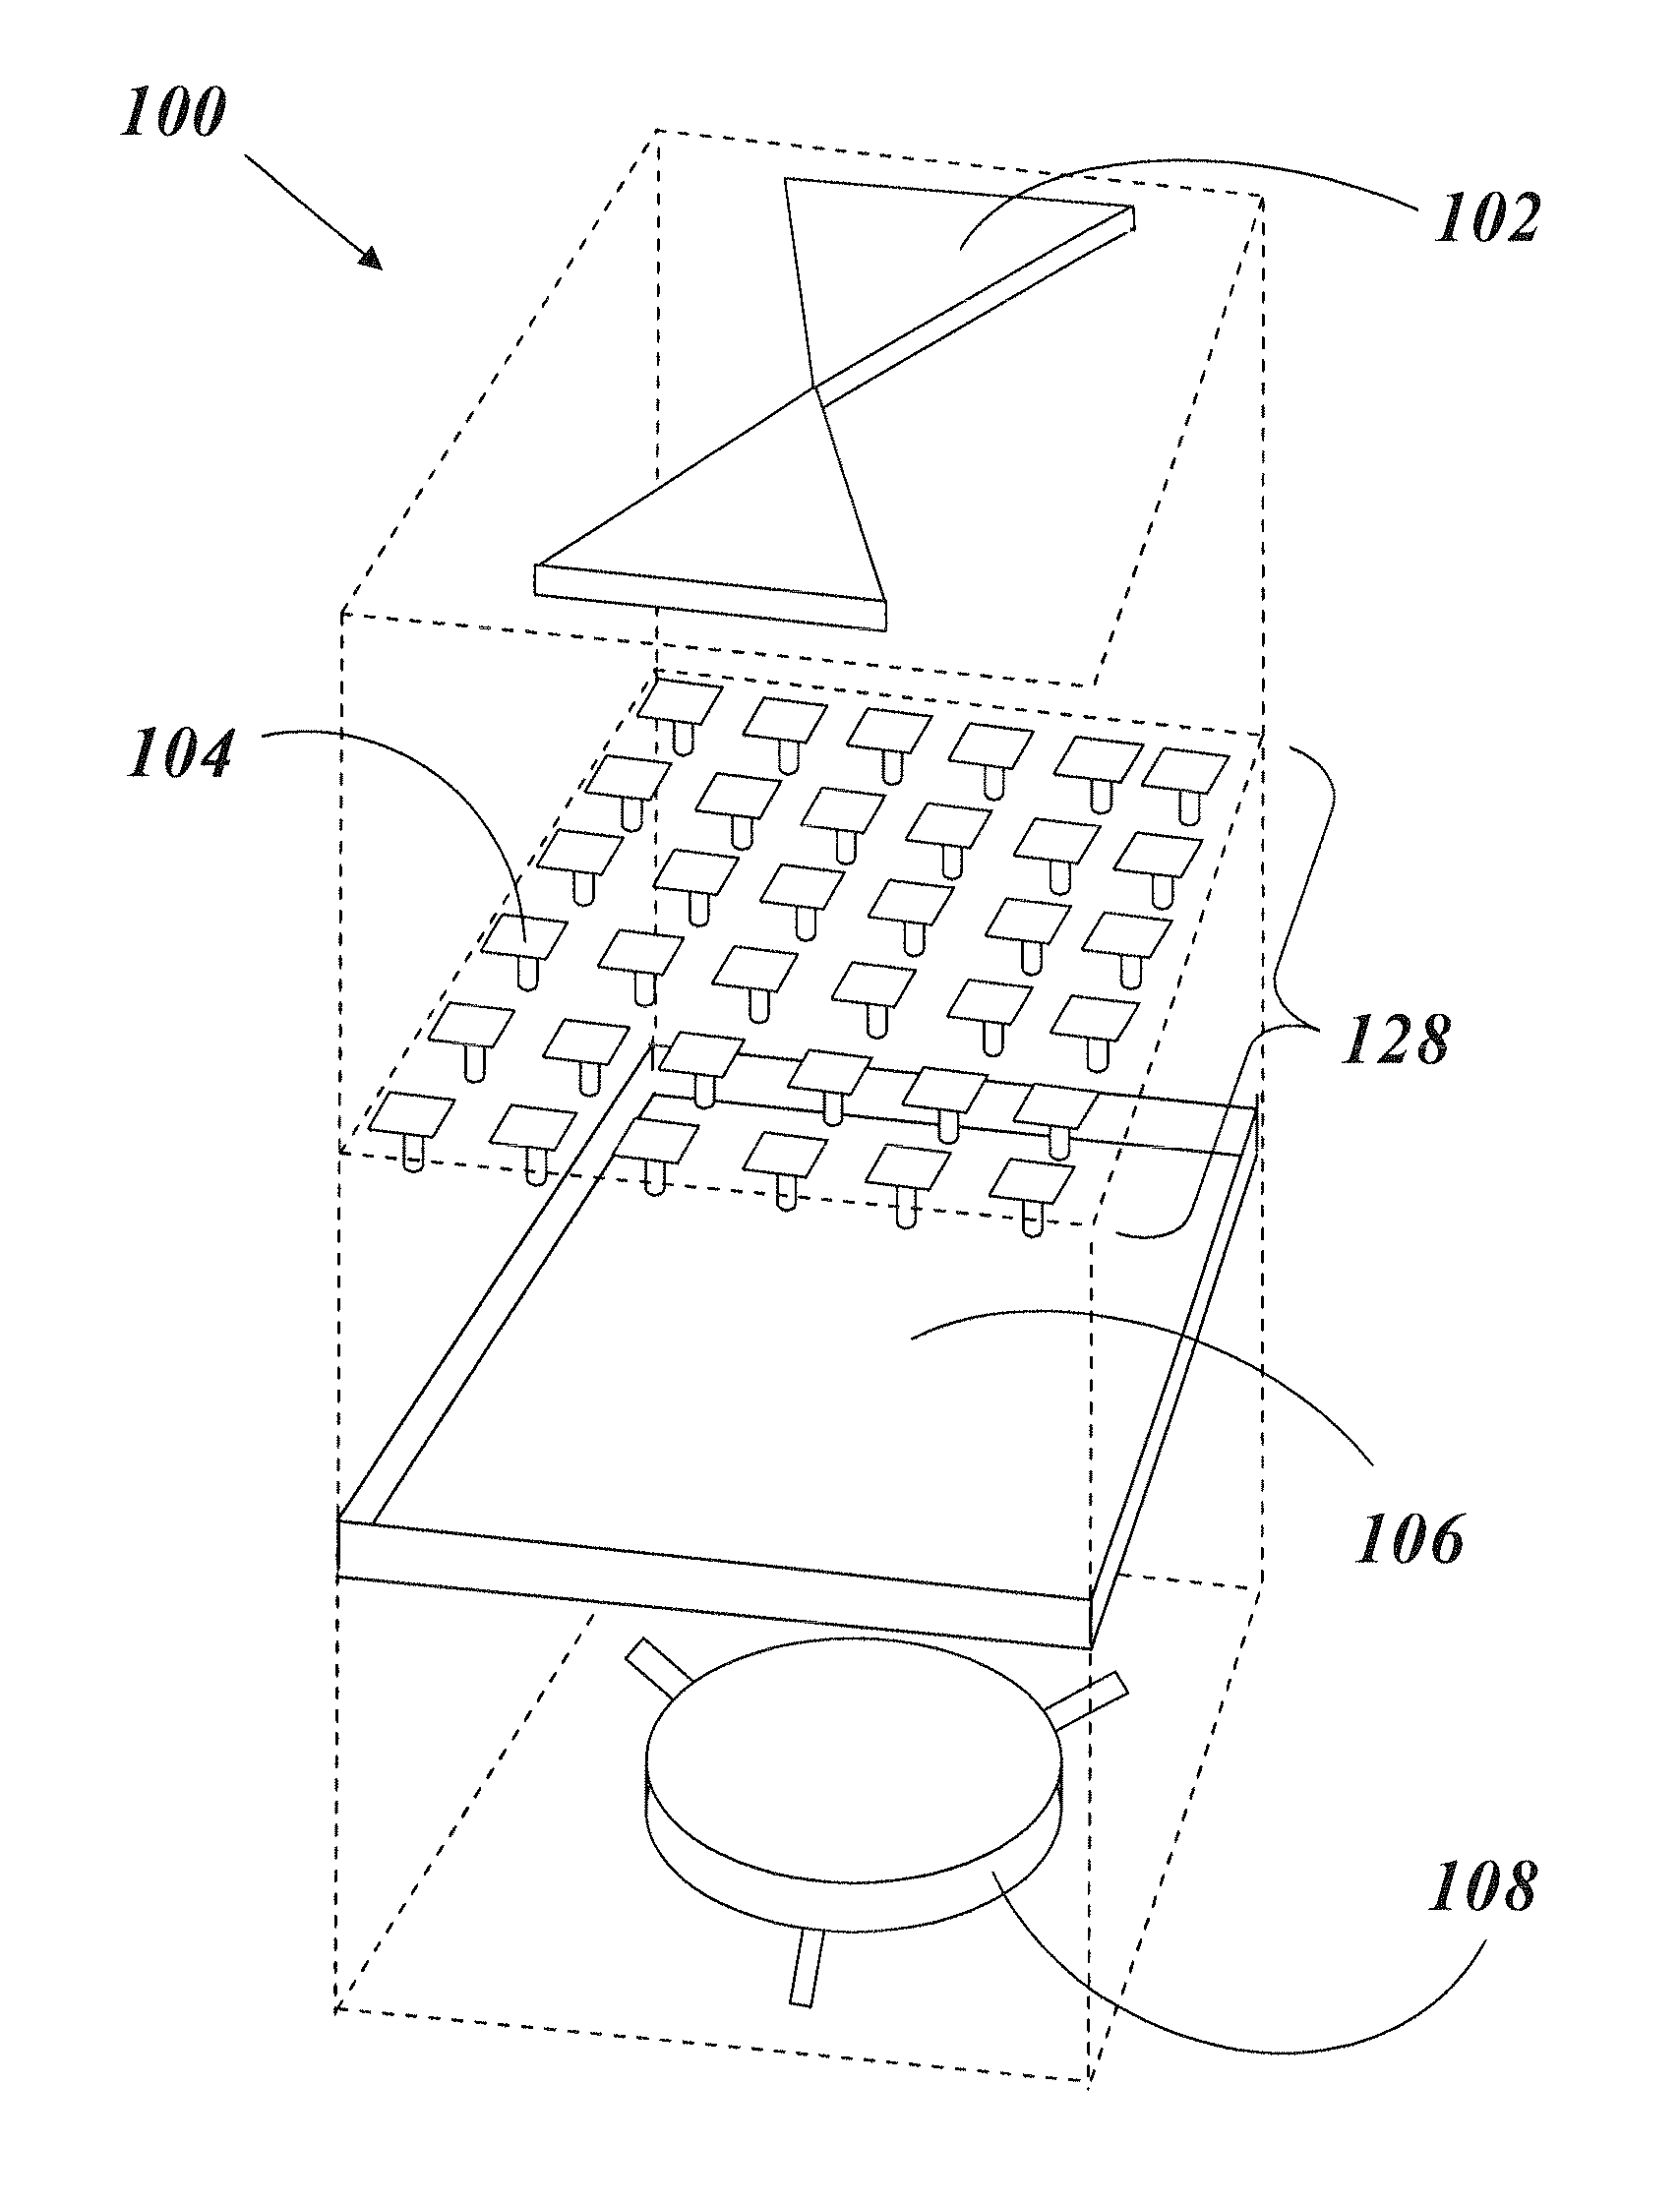 Antenna module having reduced size, high gain, and increased power efficiency